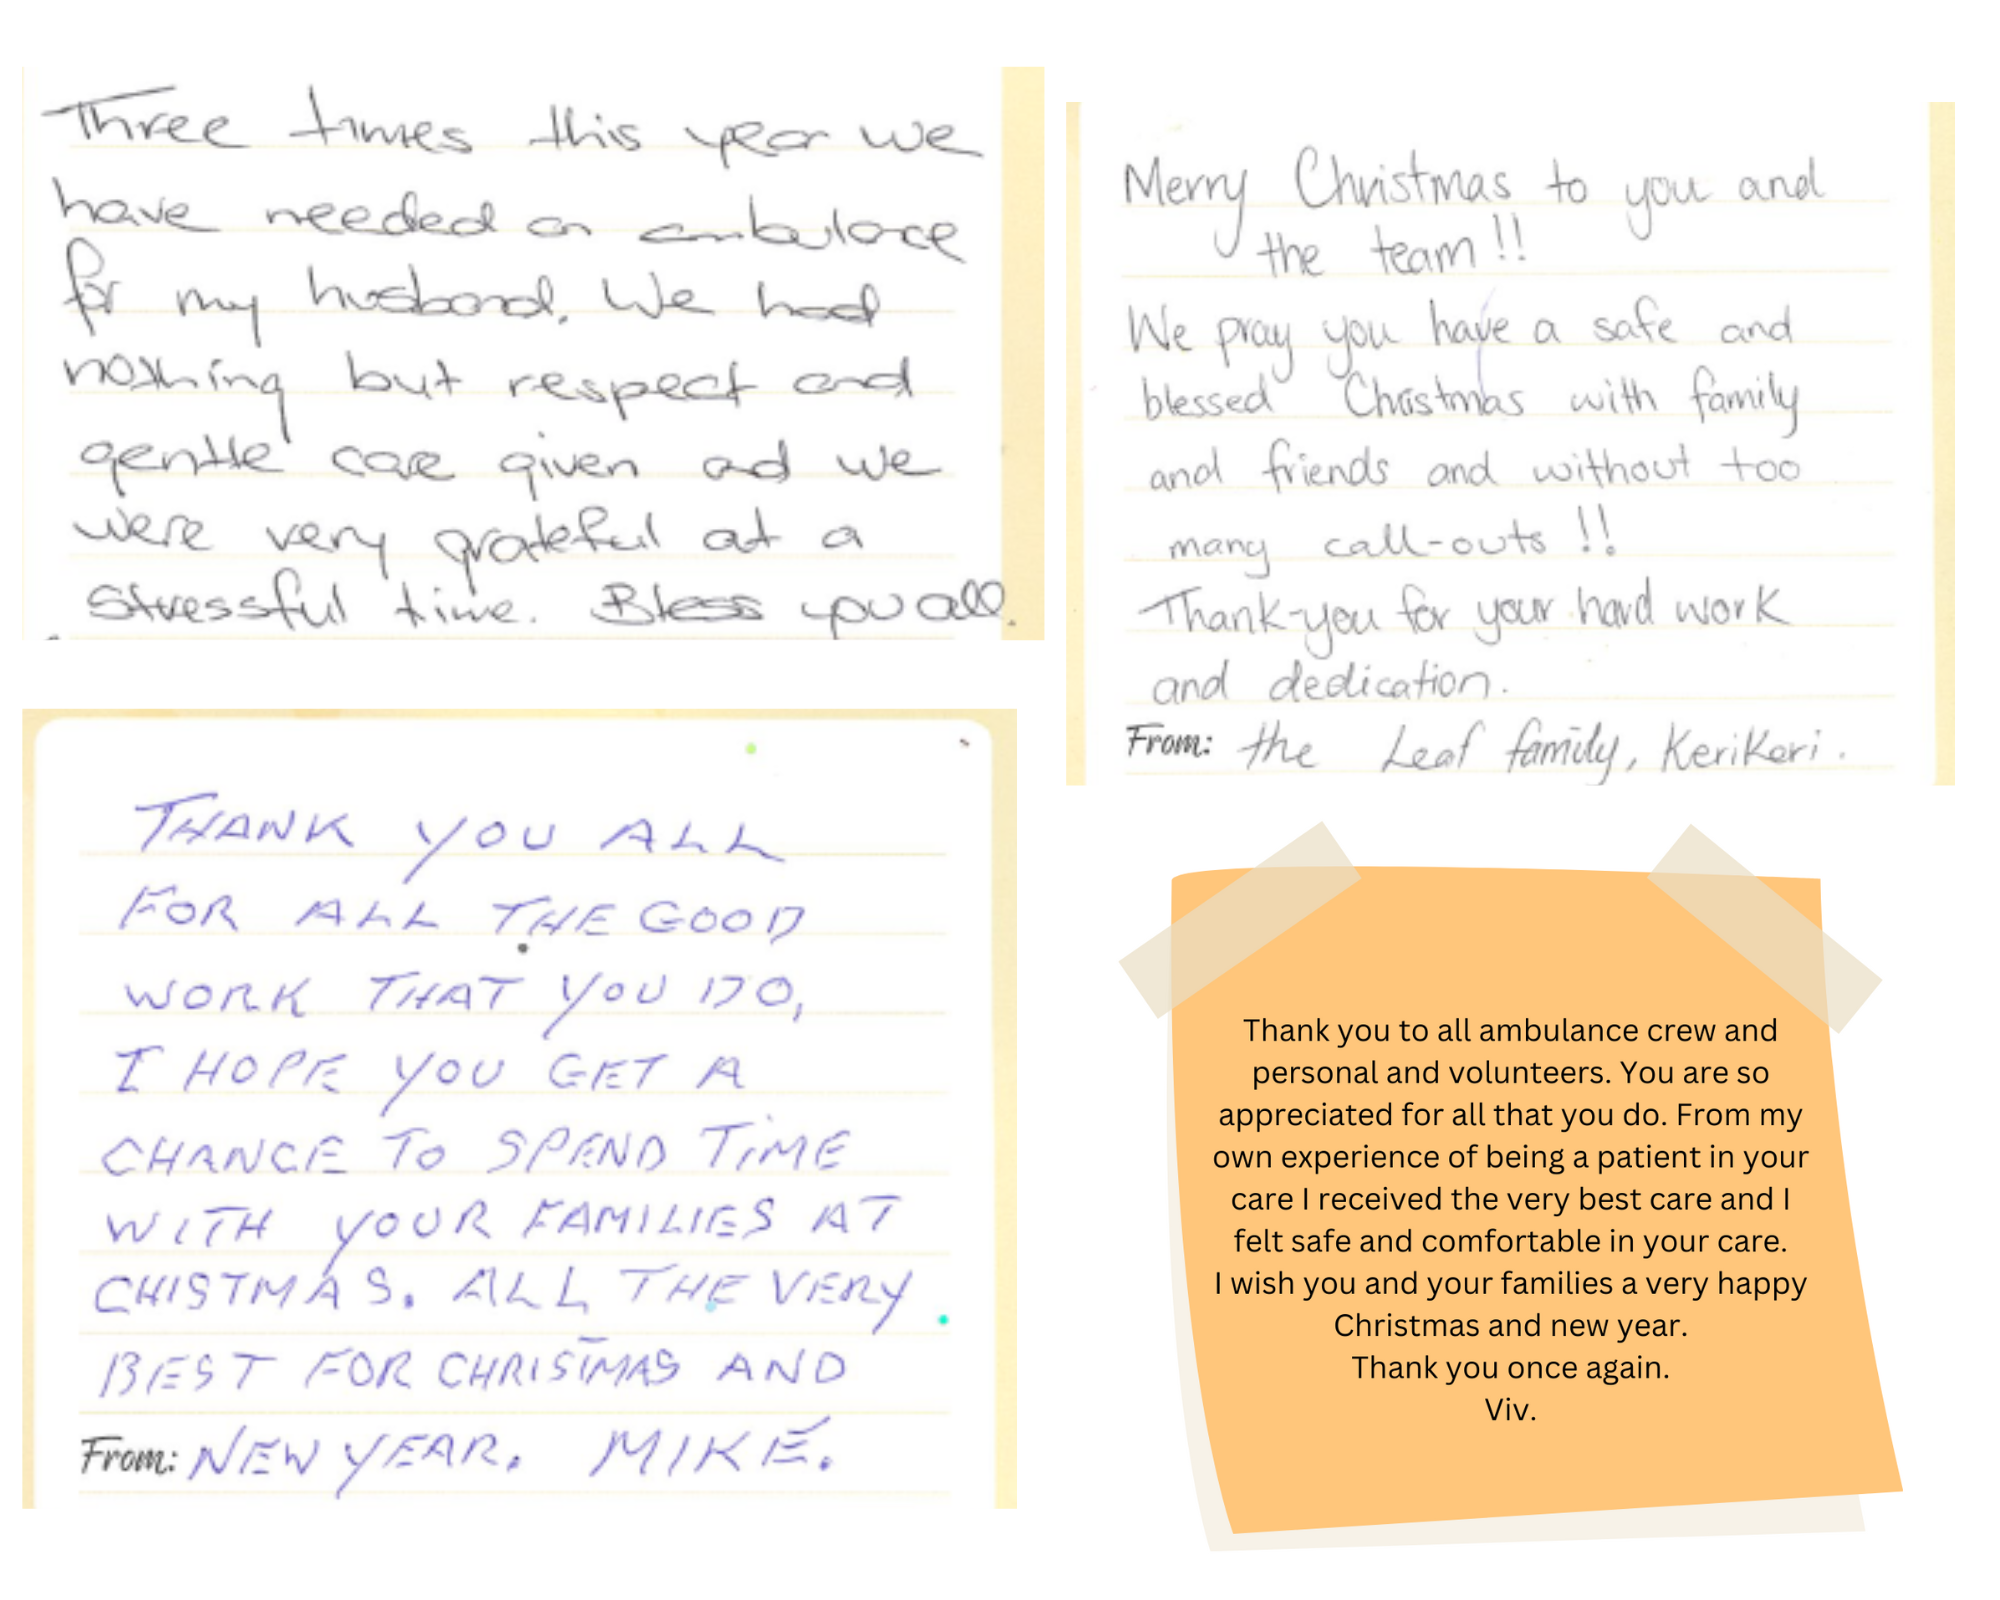 Messages of thanks and season's greetings 